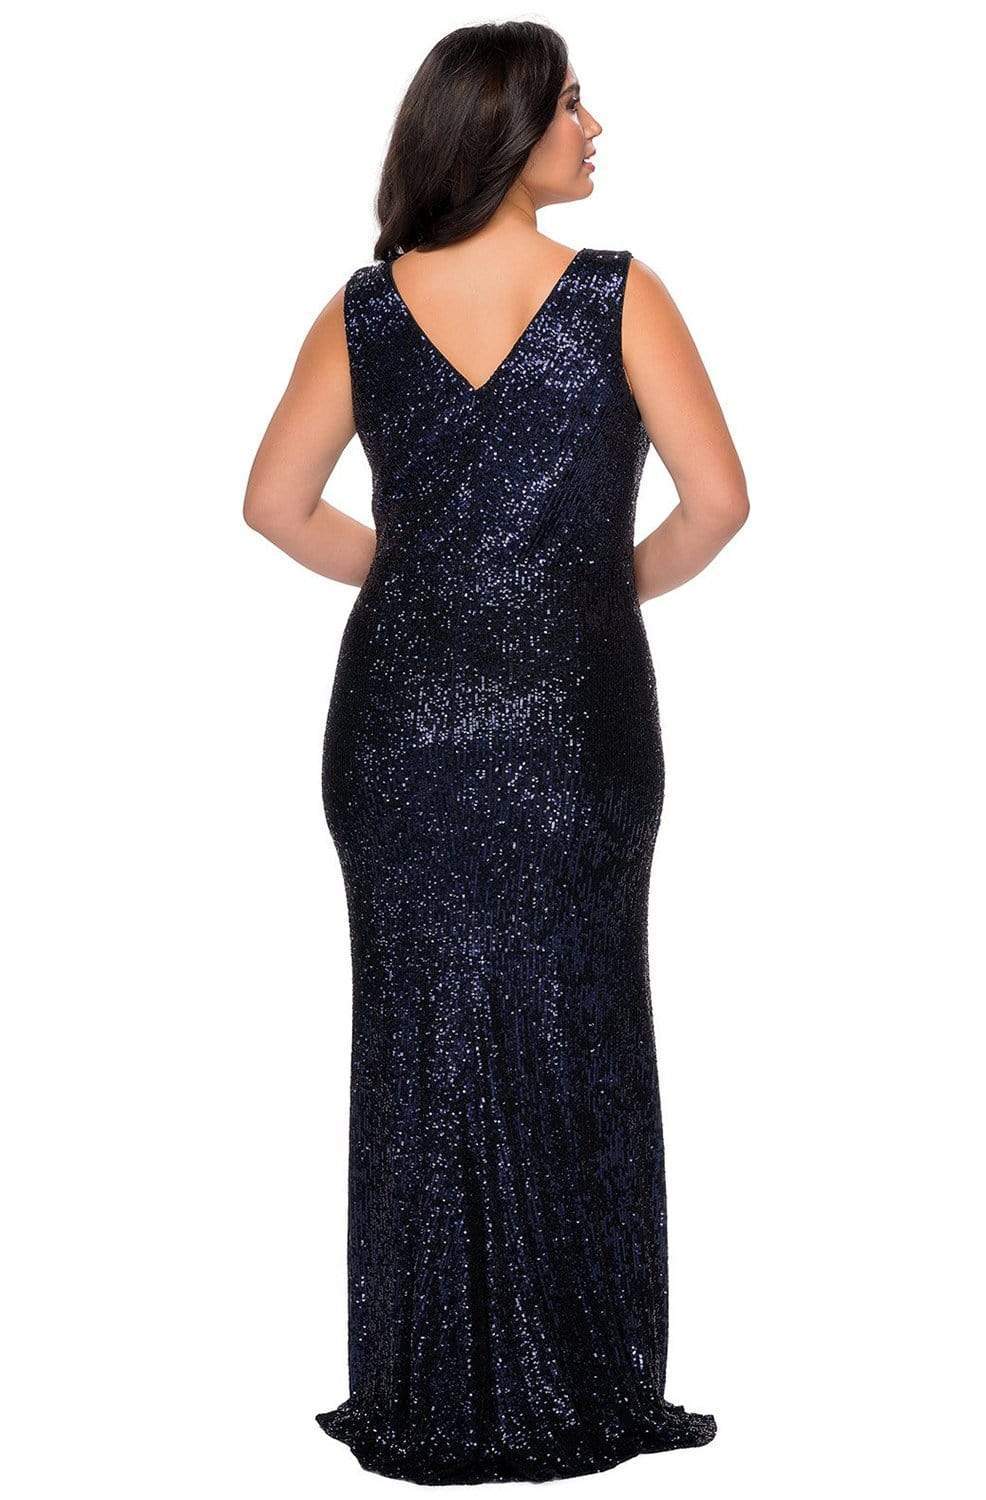 La Femme - 28770 Sleeveless V-Neck Sequin Plus Size Prom Gown – Couture ...